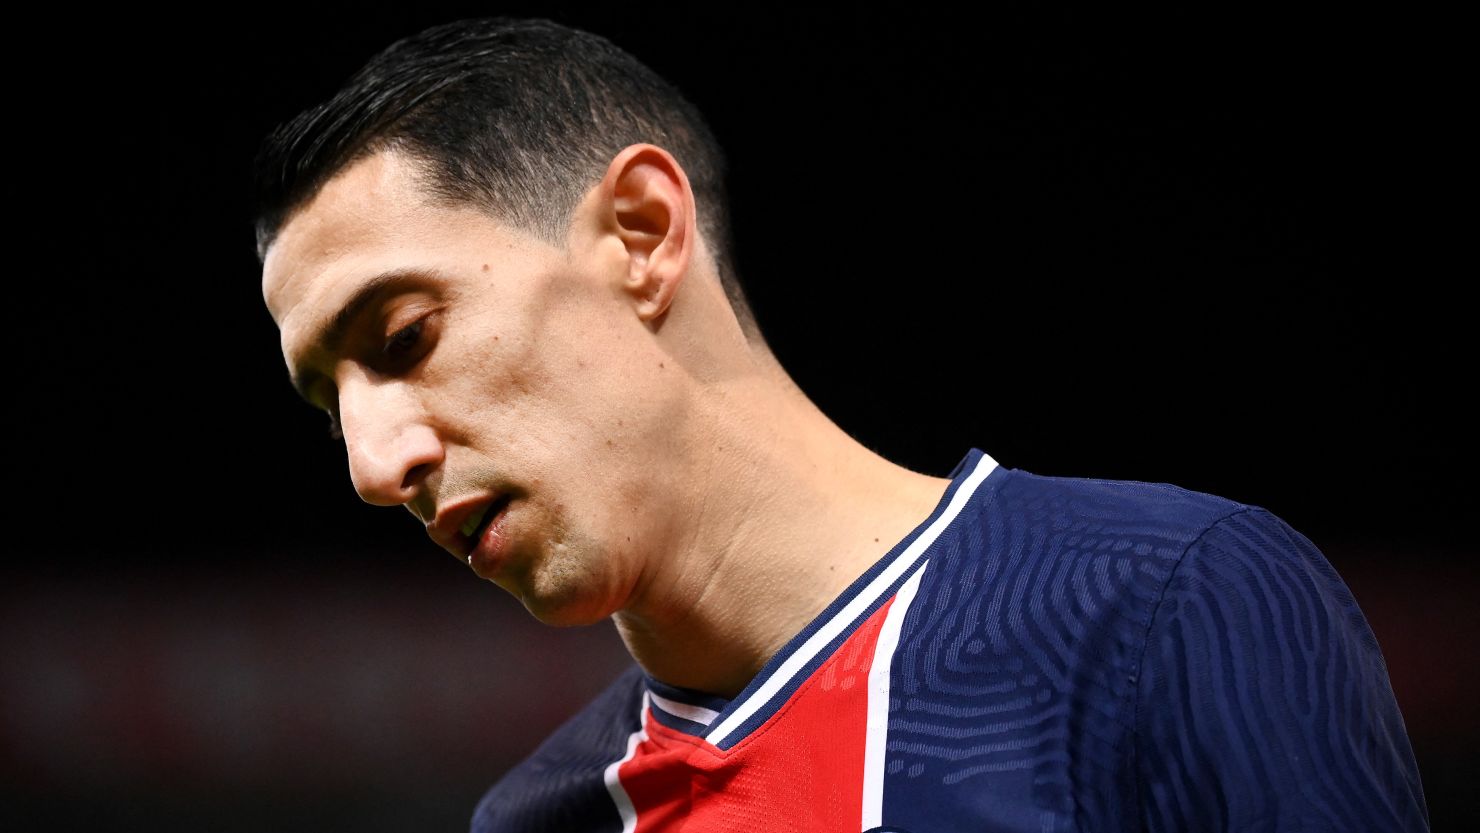 Di Maria is seen during PSG's match against Nantes.